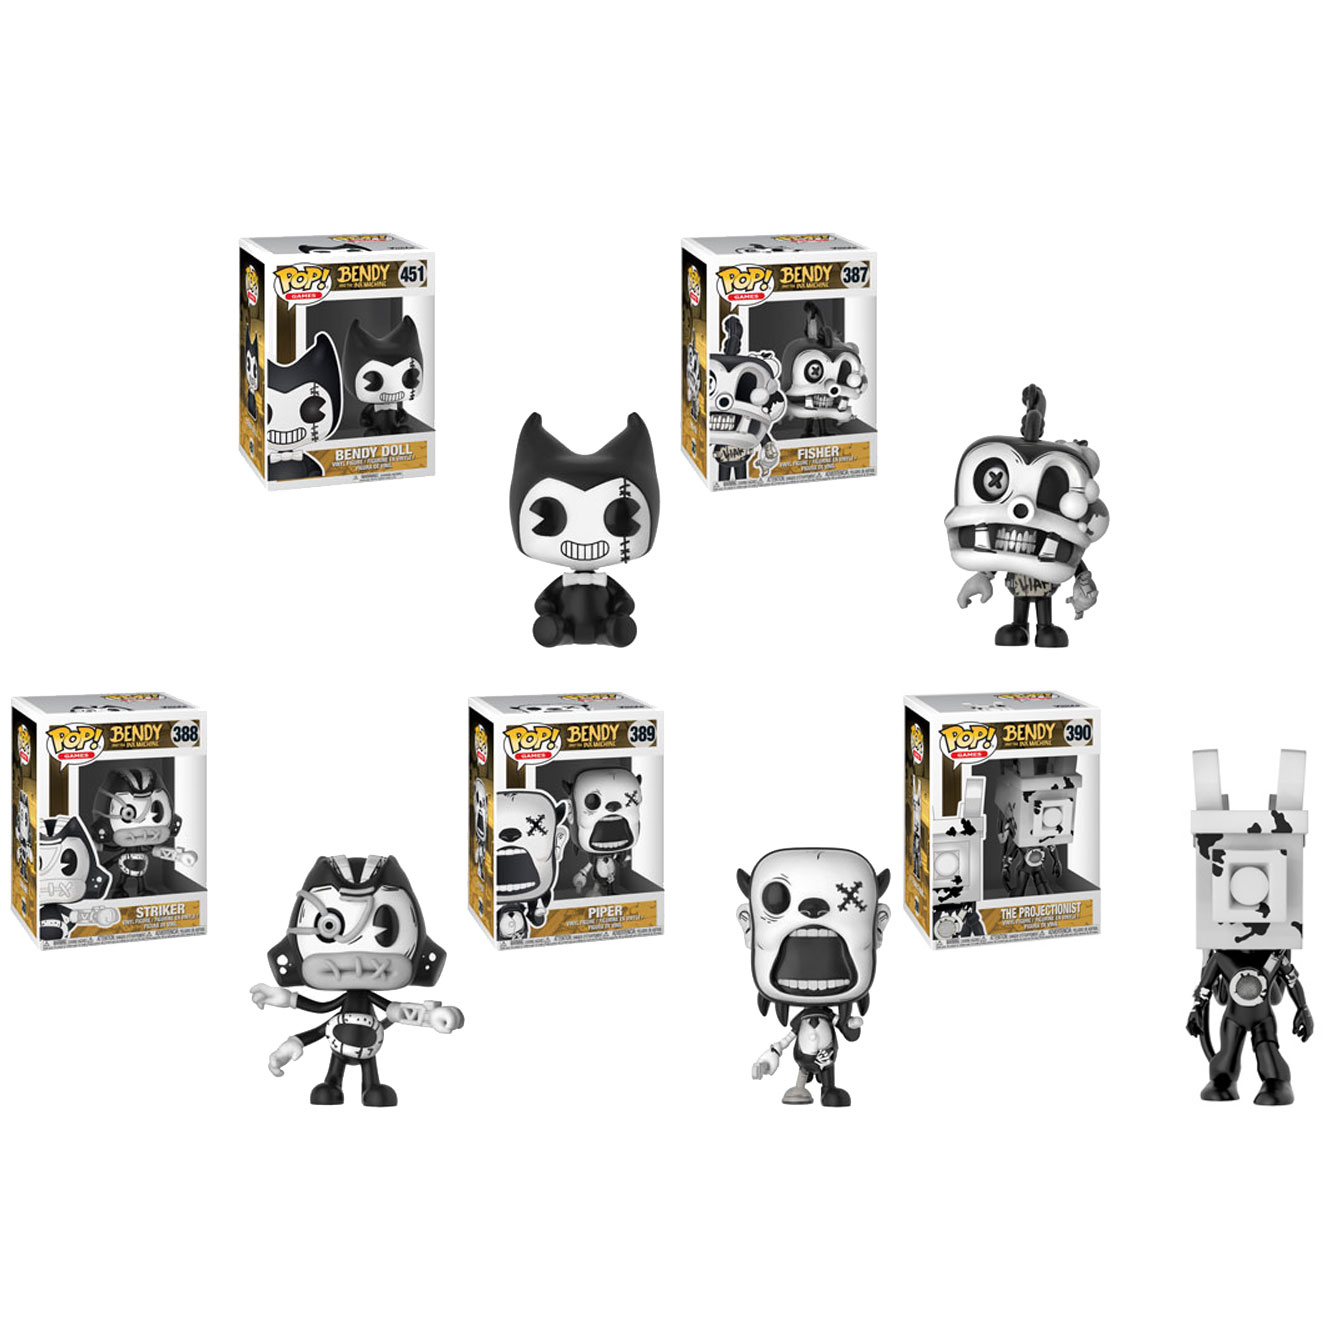 Funko POP! Games - Bendy and the Ink Machine S3 Vinyl Figures - SET OF 5 (Fisher, Piper +3)